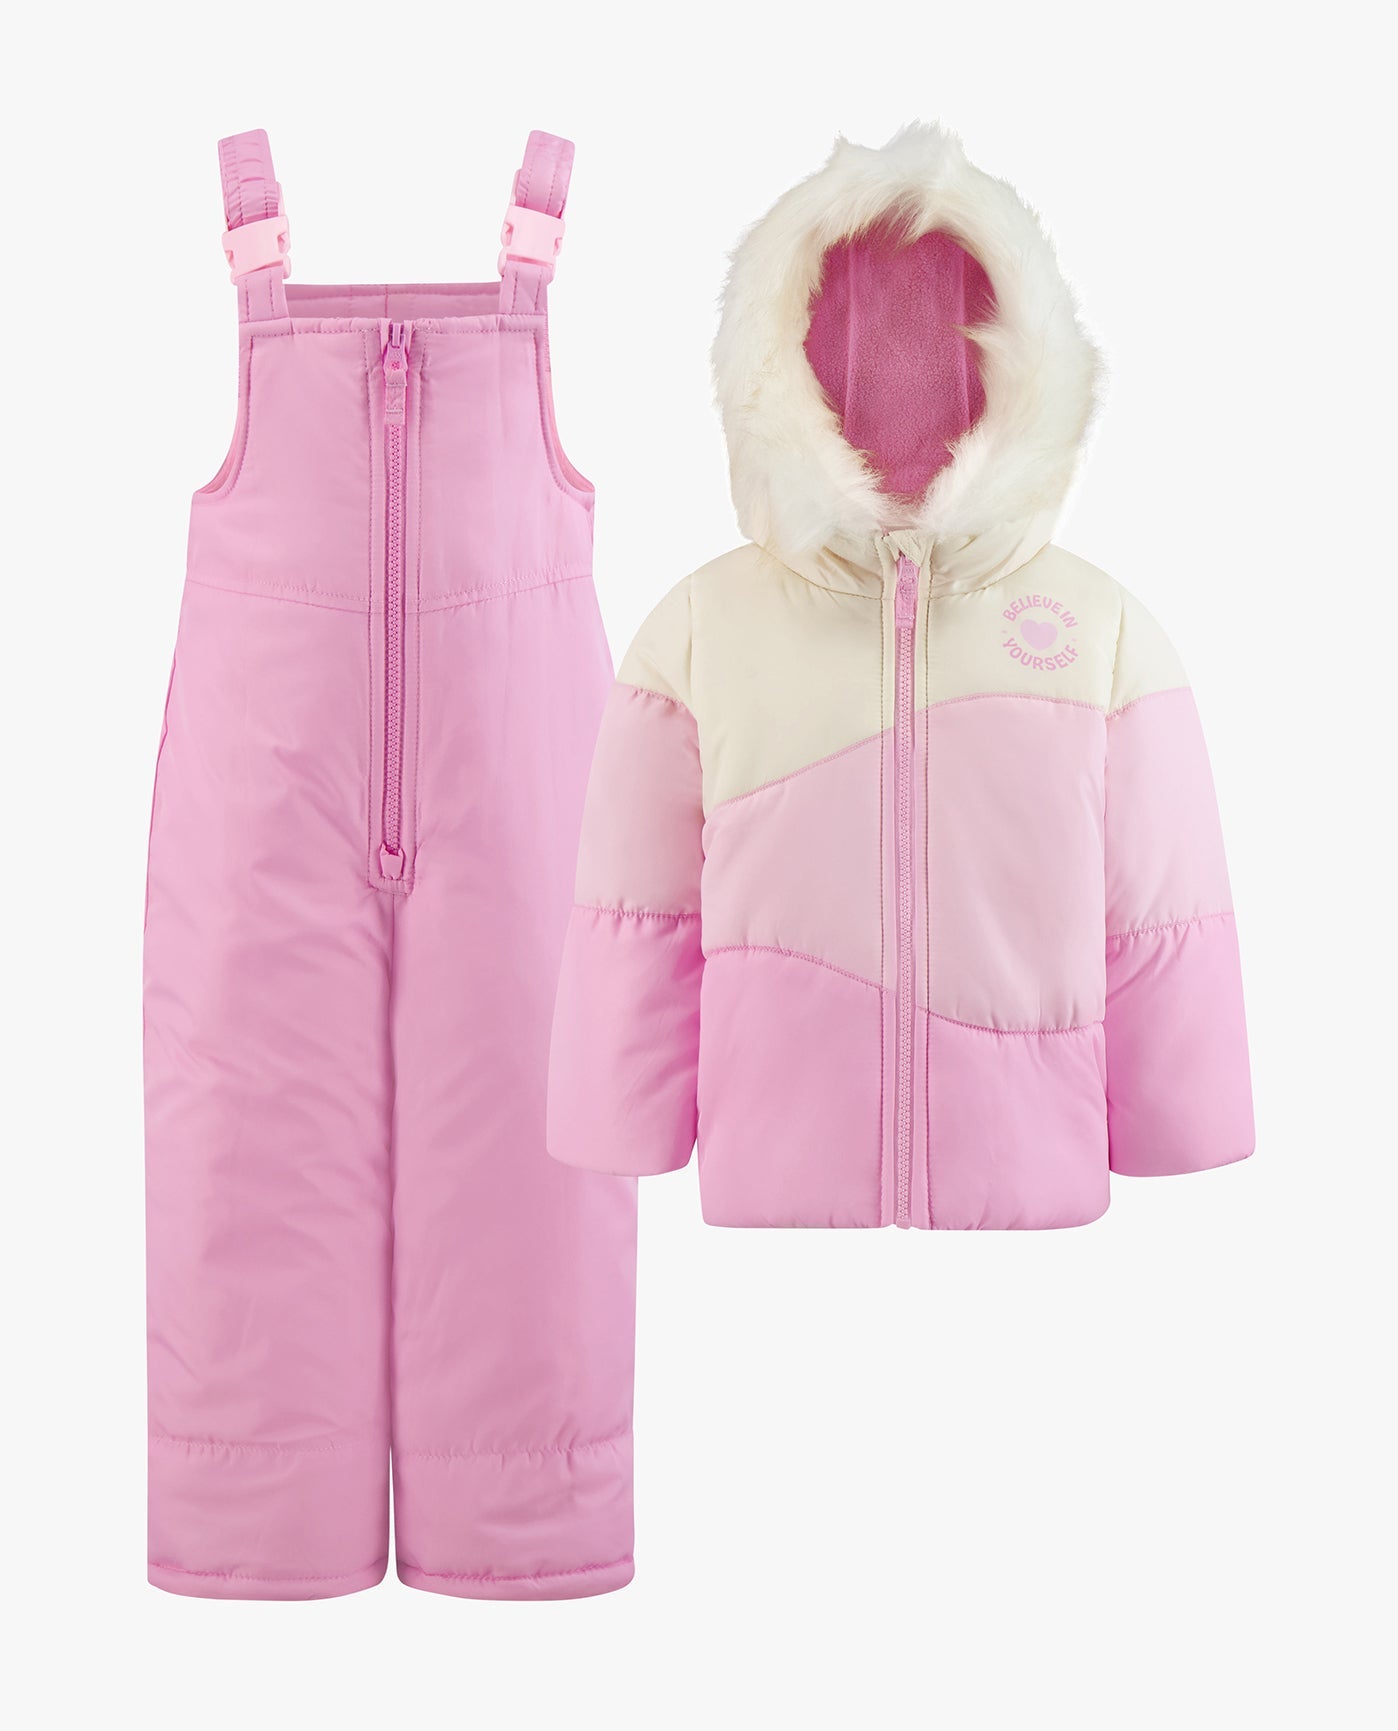 MAIN IMAGE OF GIRLS ZIP-FRONT COLOR BLOCK JACKET AND OVERALL SNOW PANT | PINK